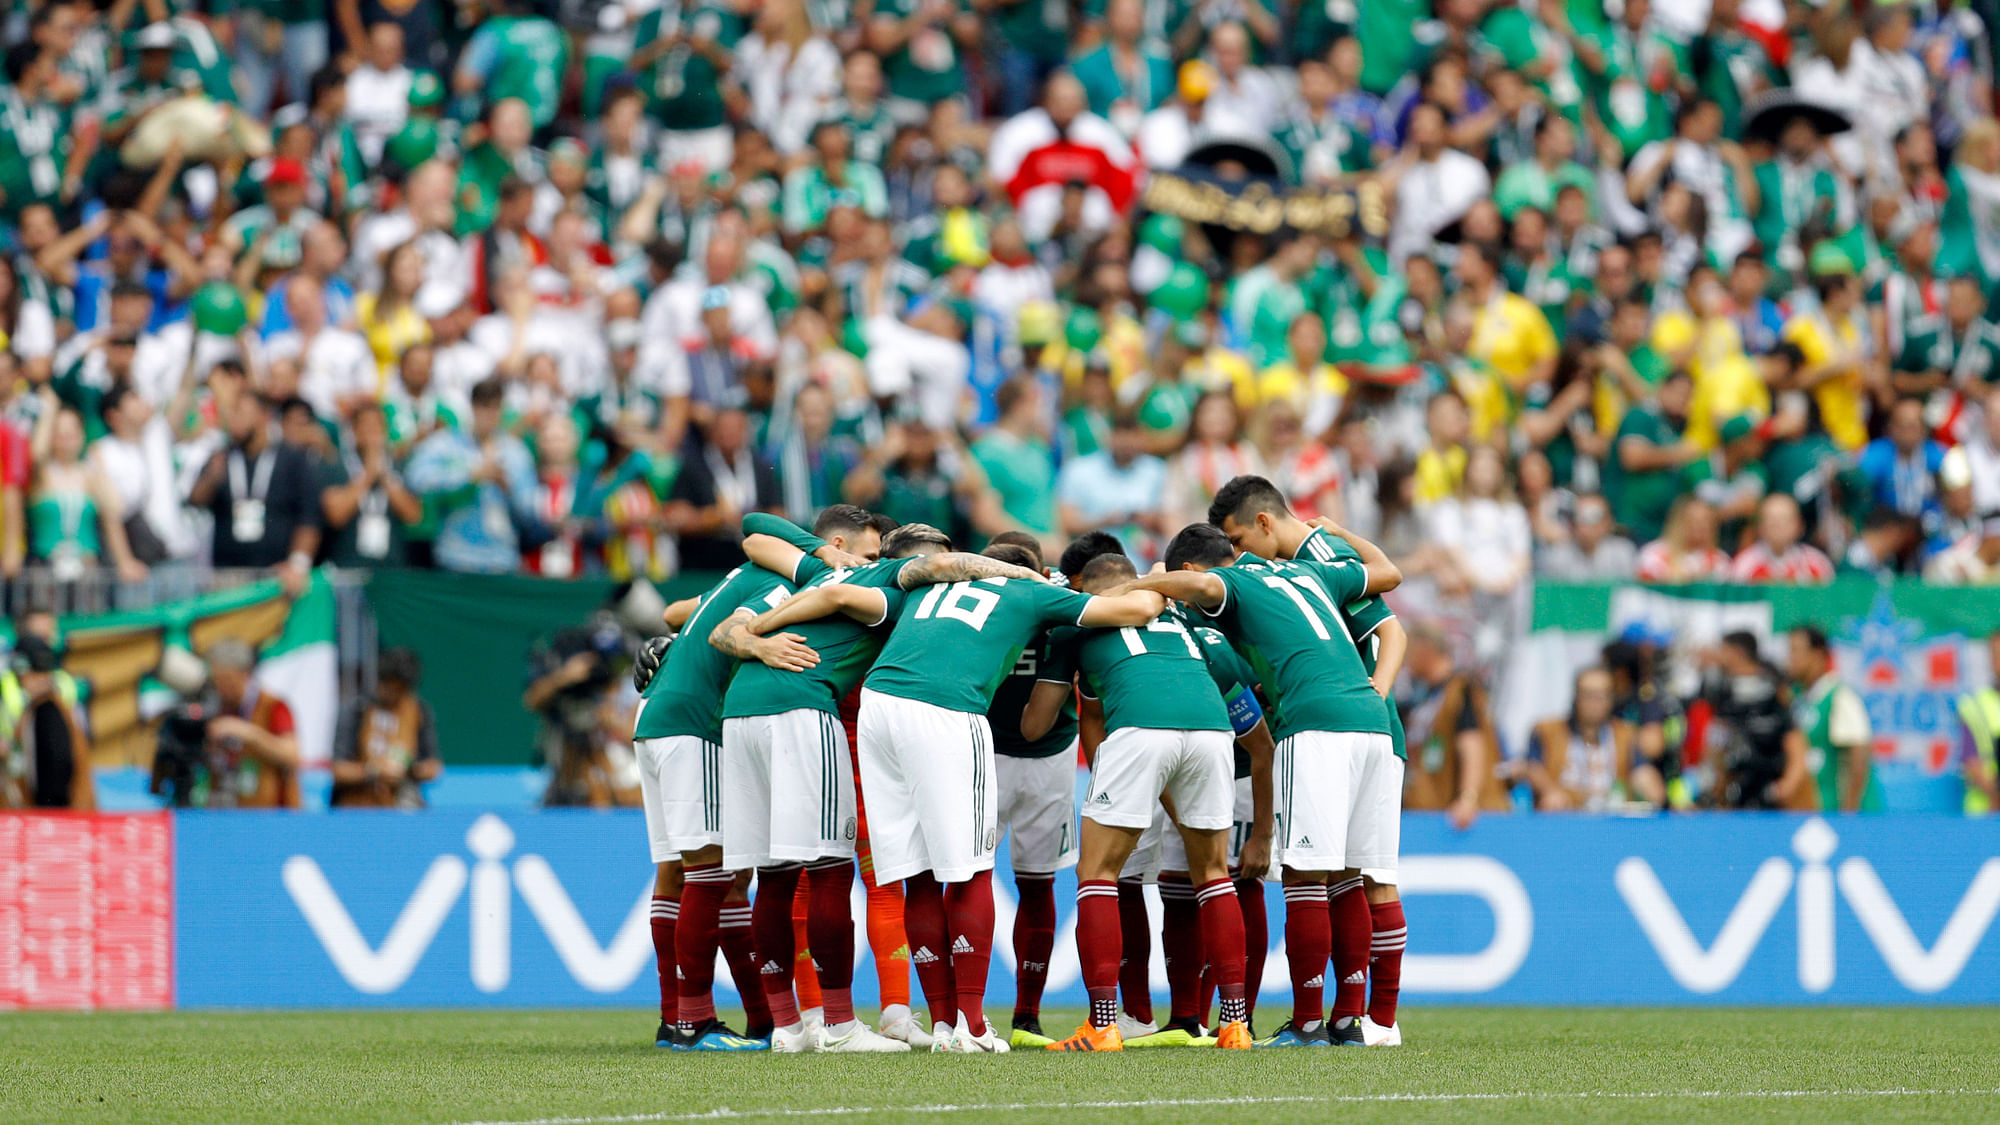 FIFA has opened disciplinary proceedings against Mexico after its fans used an anti-gay slur during the team’s 1-0 win over Germany.